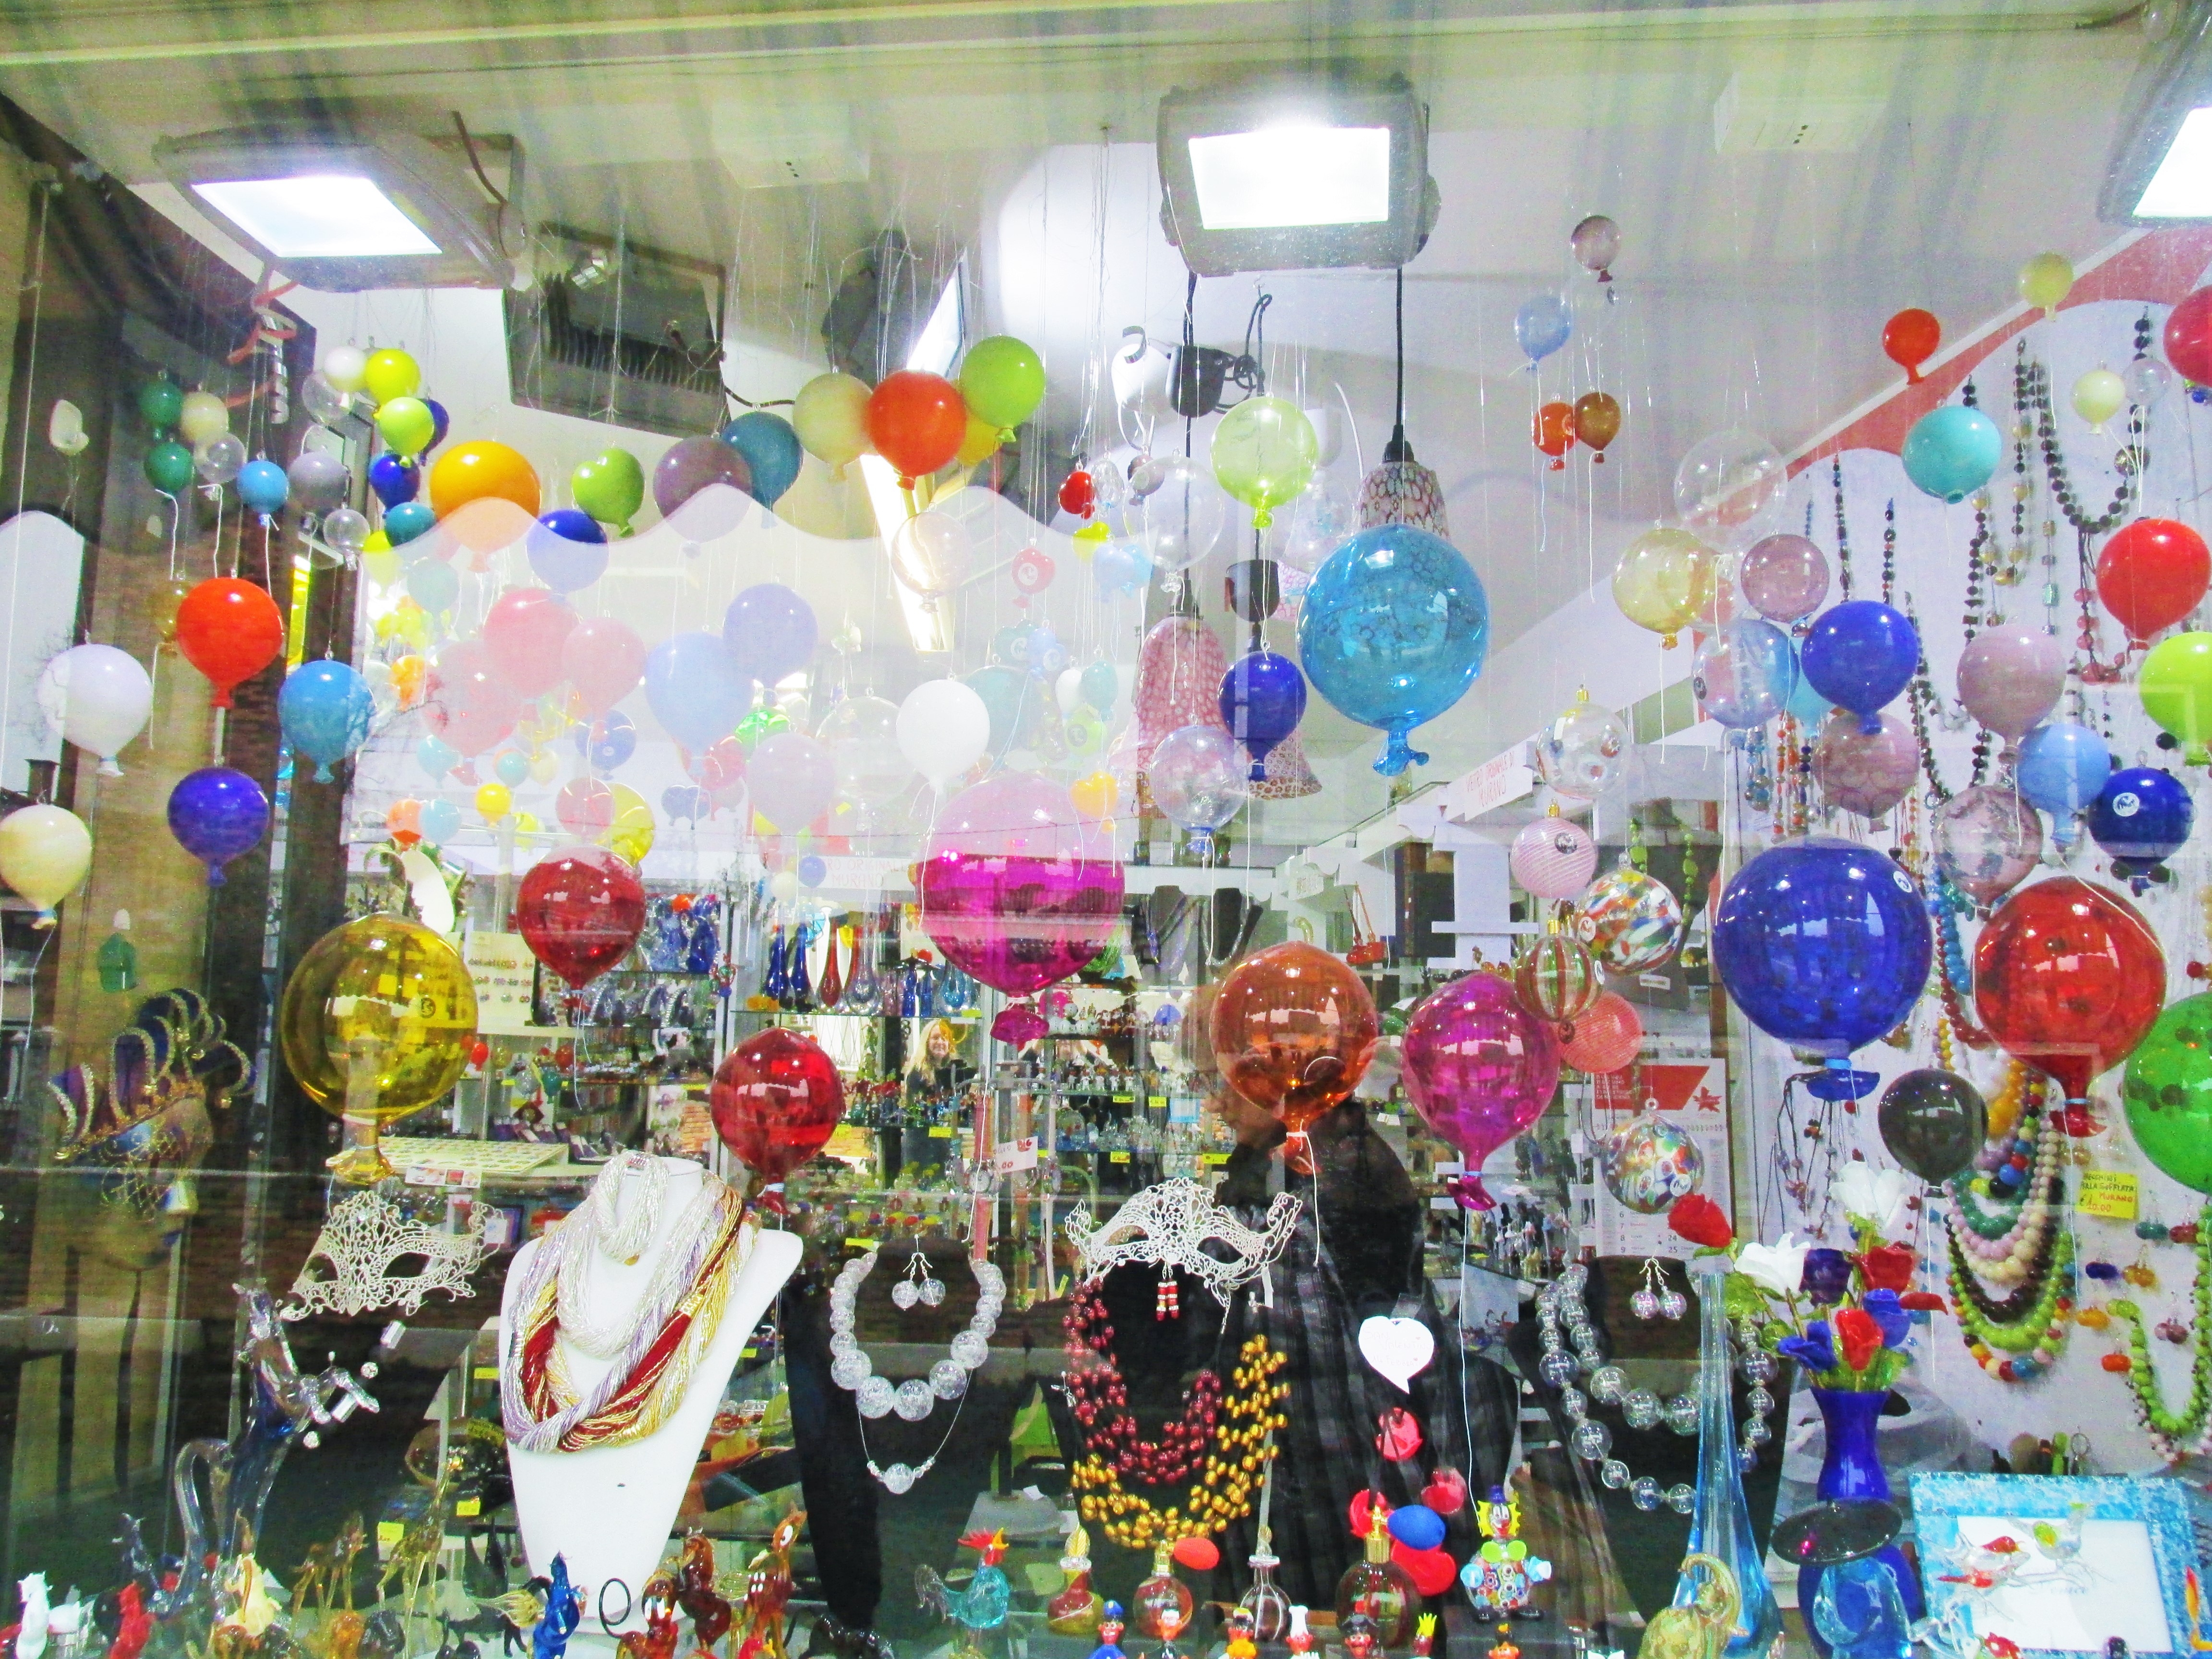 Windows beckon in Murano, but should travelers with children enter glass shops? Photo credit: M. Ciavardini